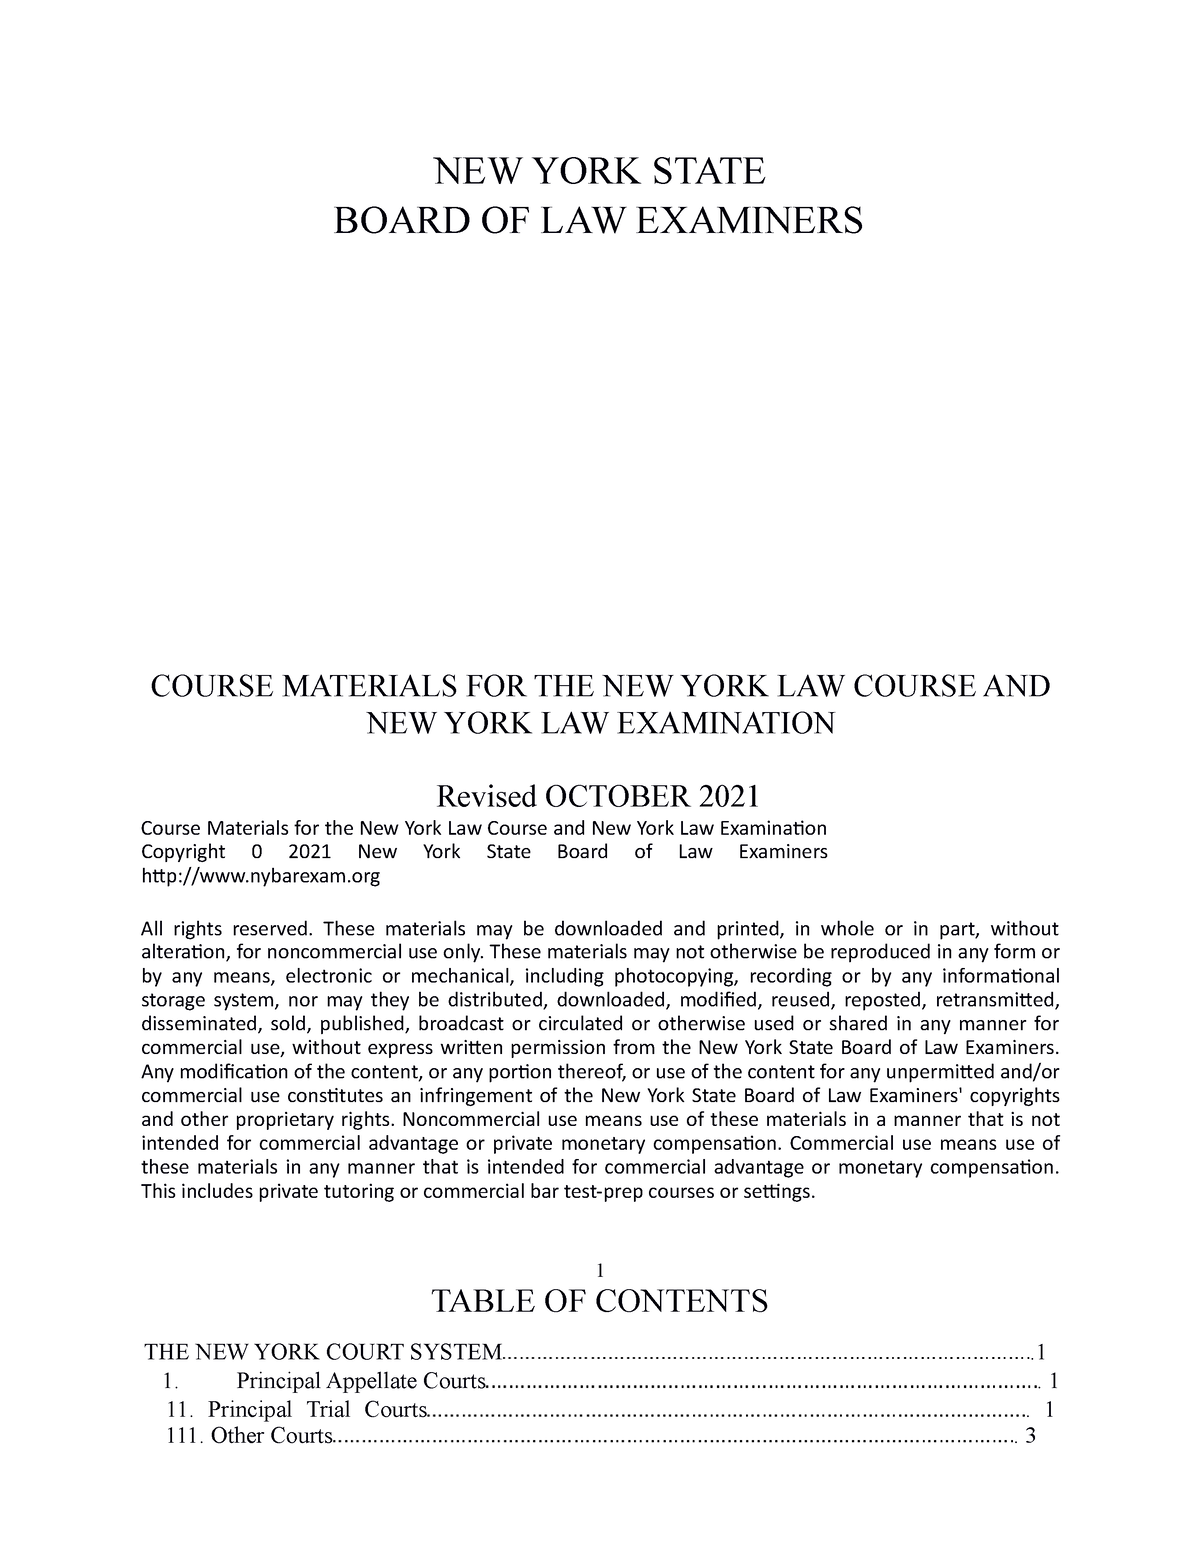 New York Bar Exam Course Materials NEW YORK STATE BOARD OF LAW